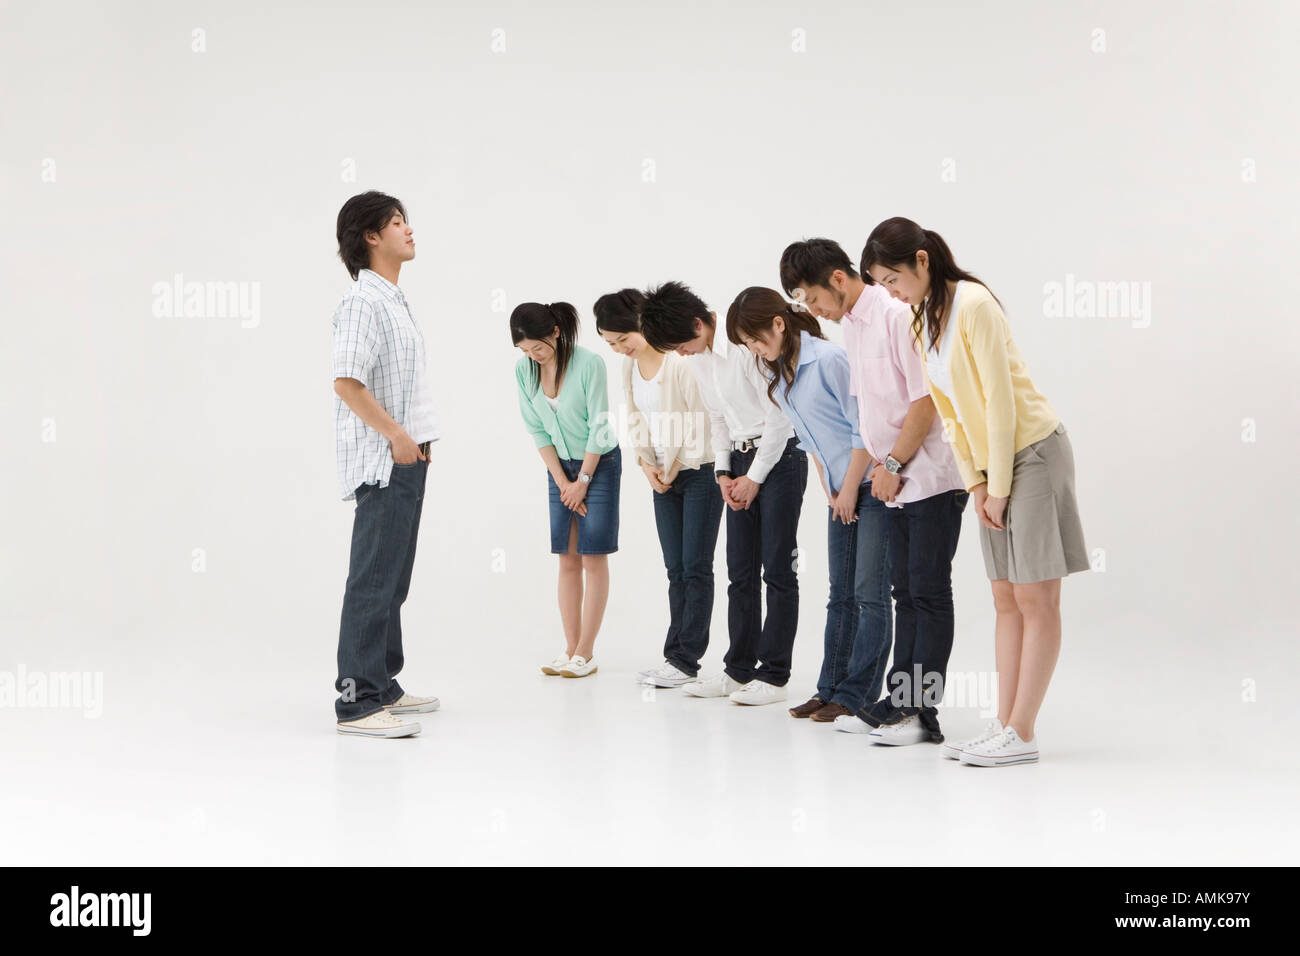 Group of people bowing to a young man Stock Photo